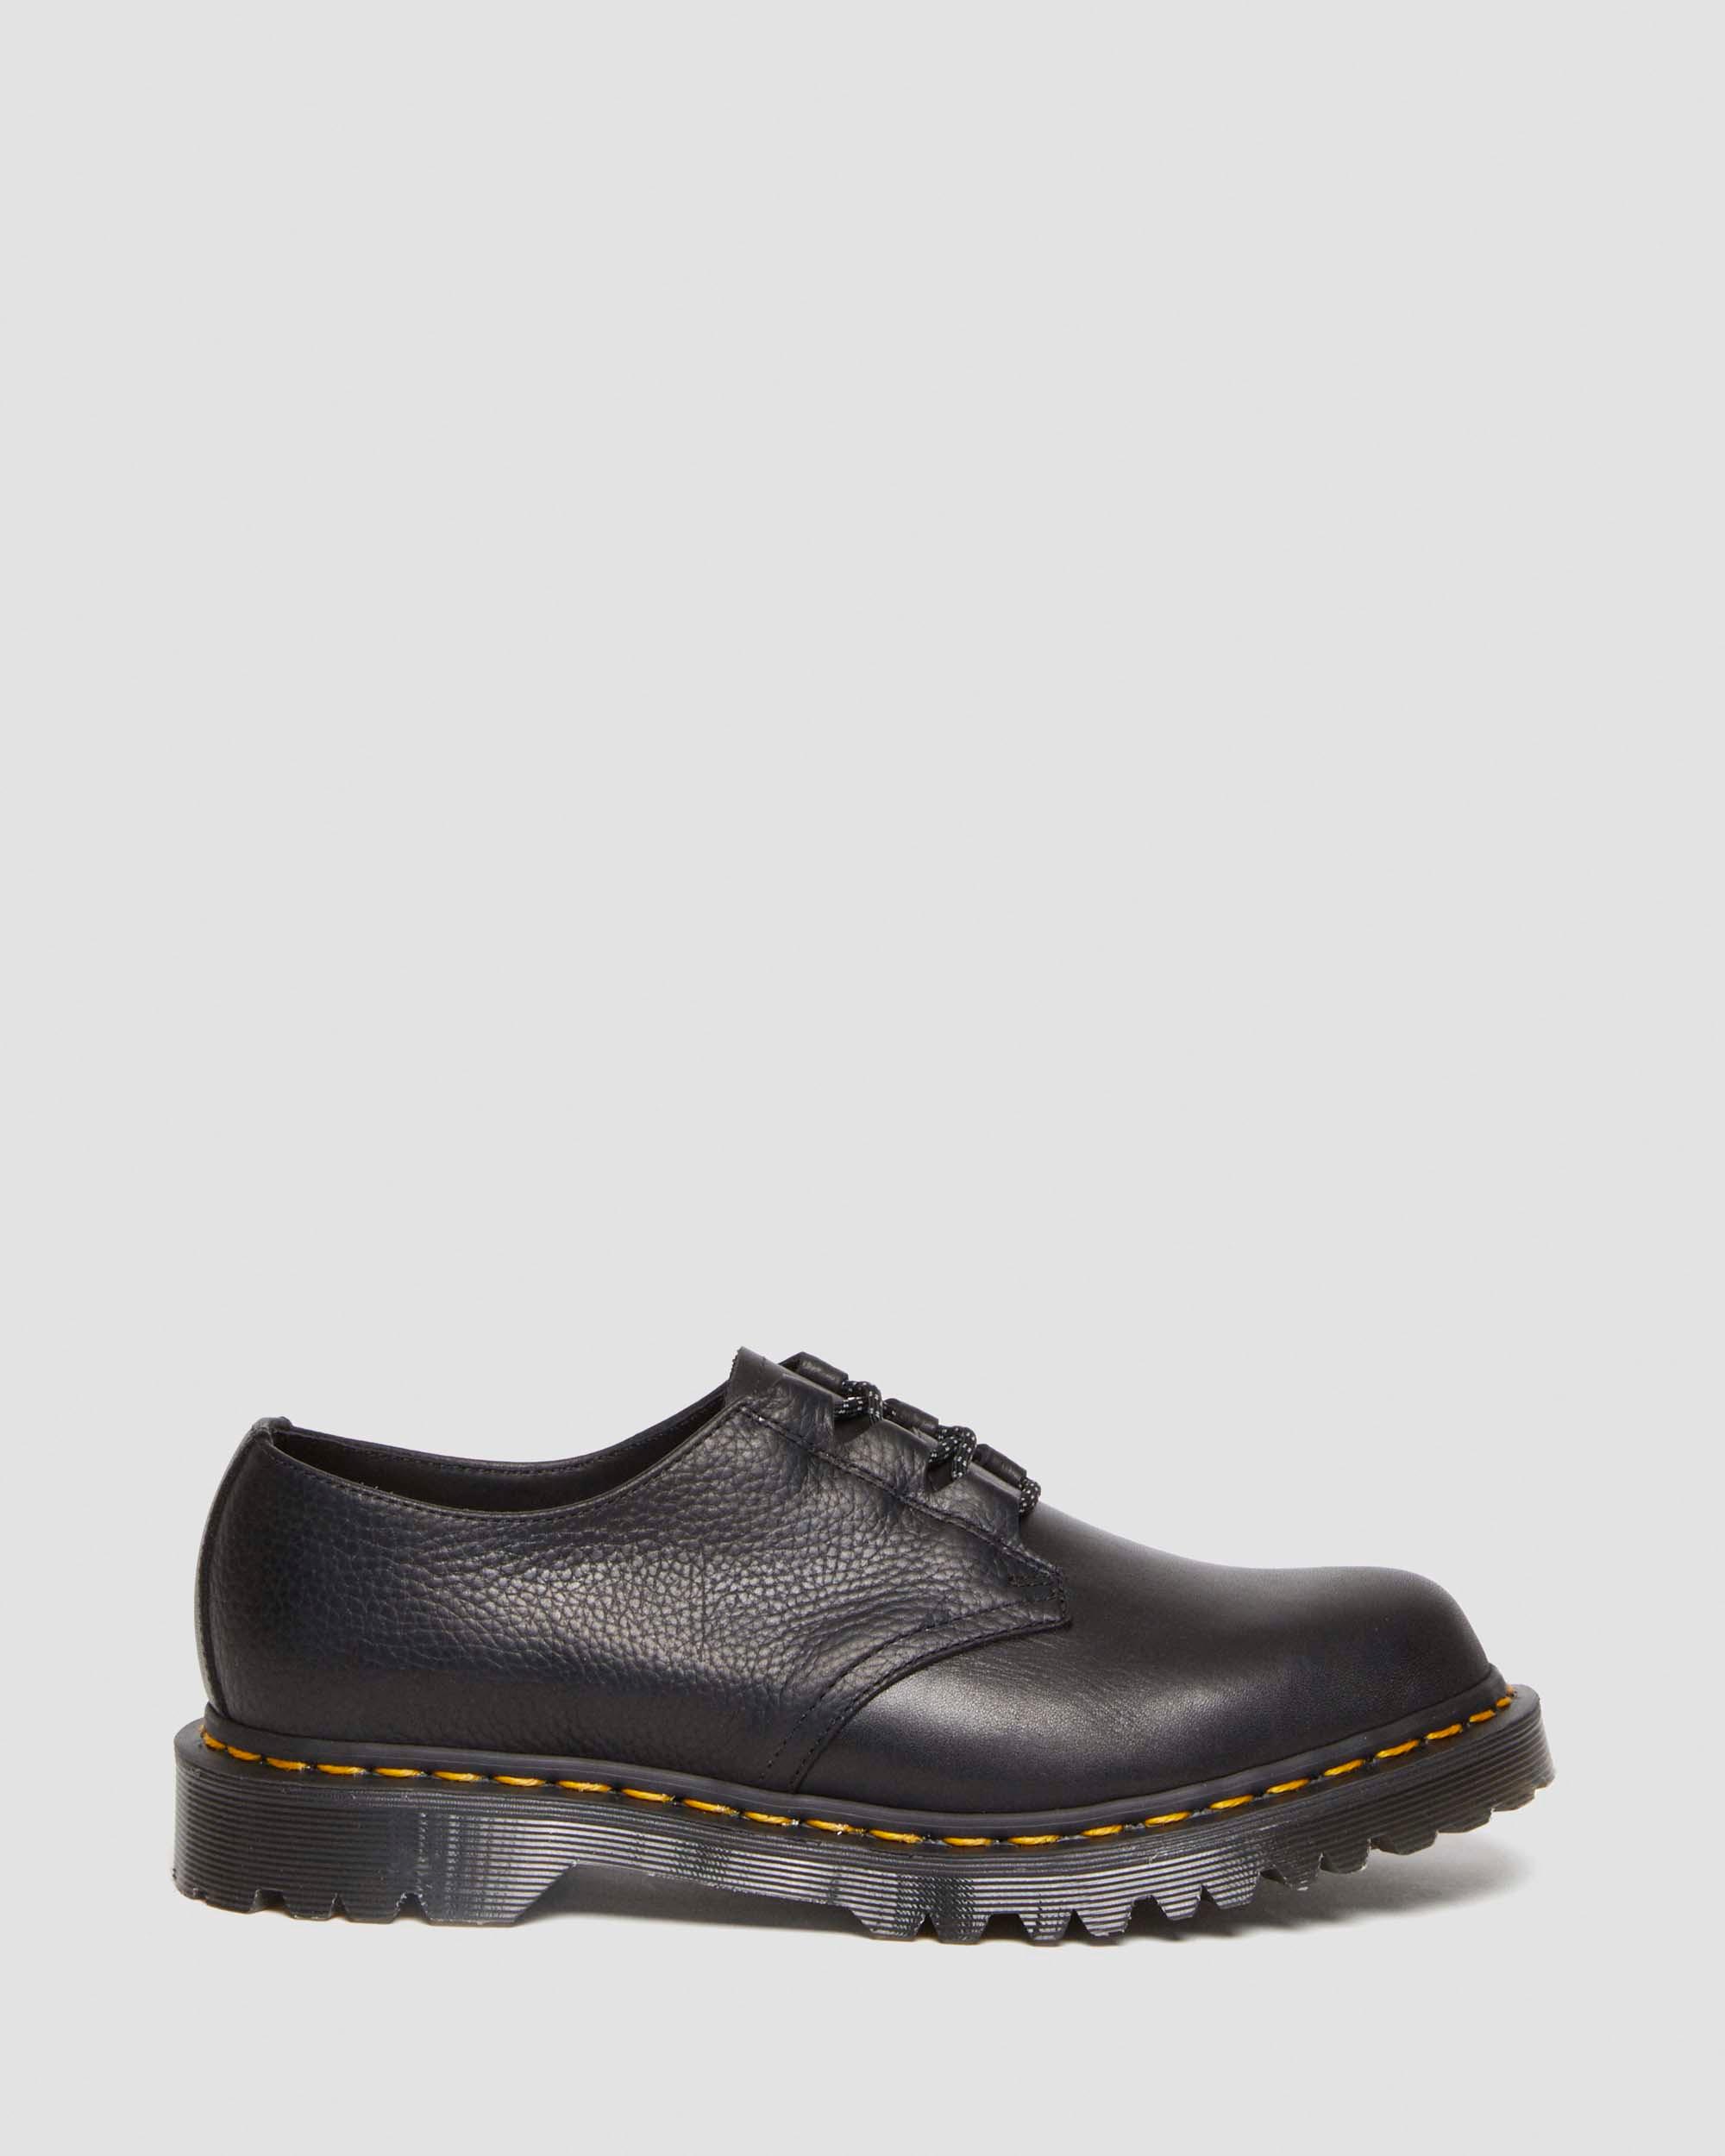 1461 Made in England Ghillie Leather Oxfords in Black